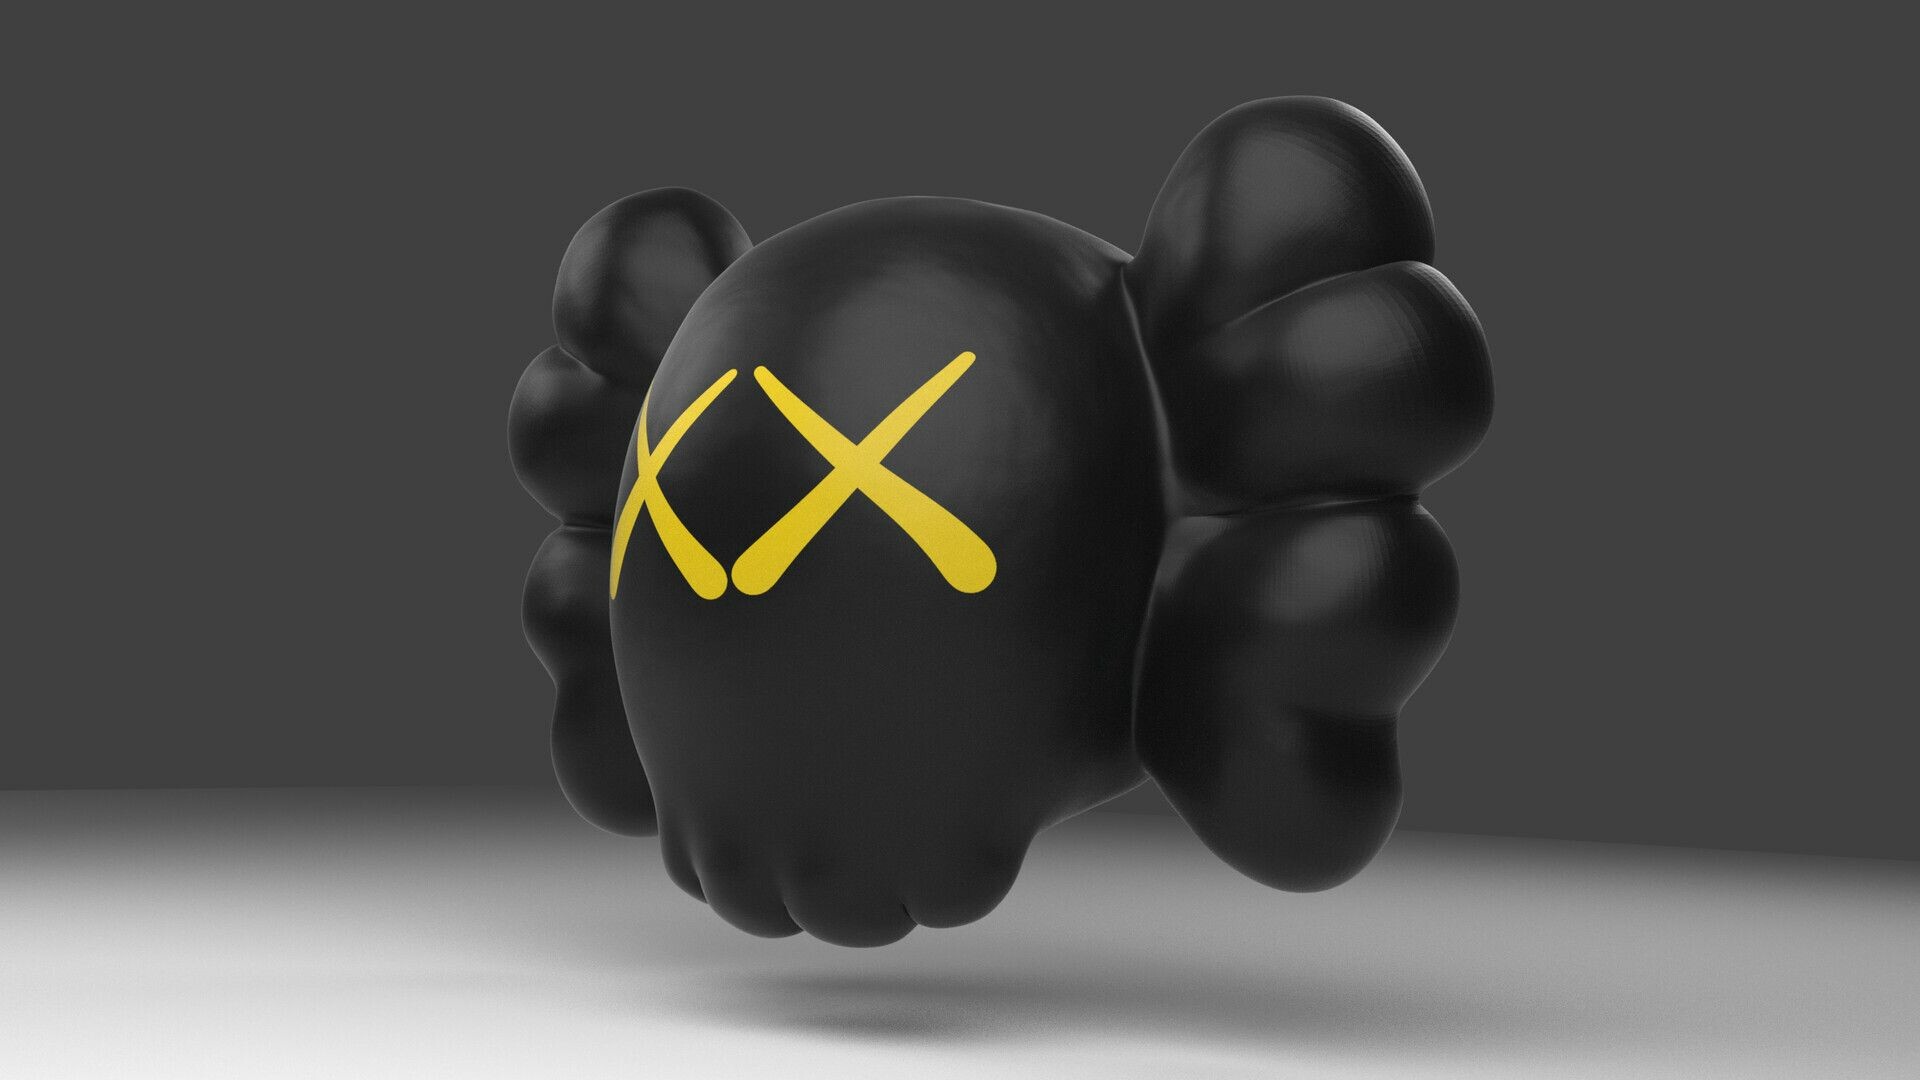 KAWS: Has collaborated on toys with Japanese companies: Nigo for A Bathing Ape, Medicom Toy, and Santastic. 1920x1080 Full HD Background.